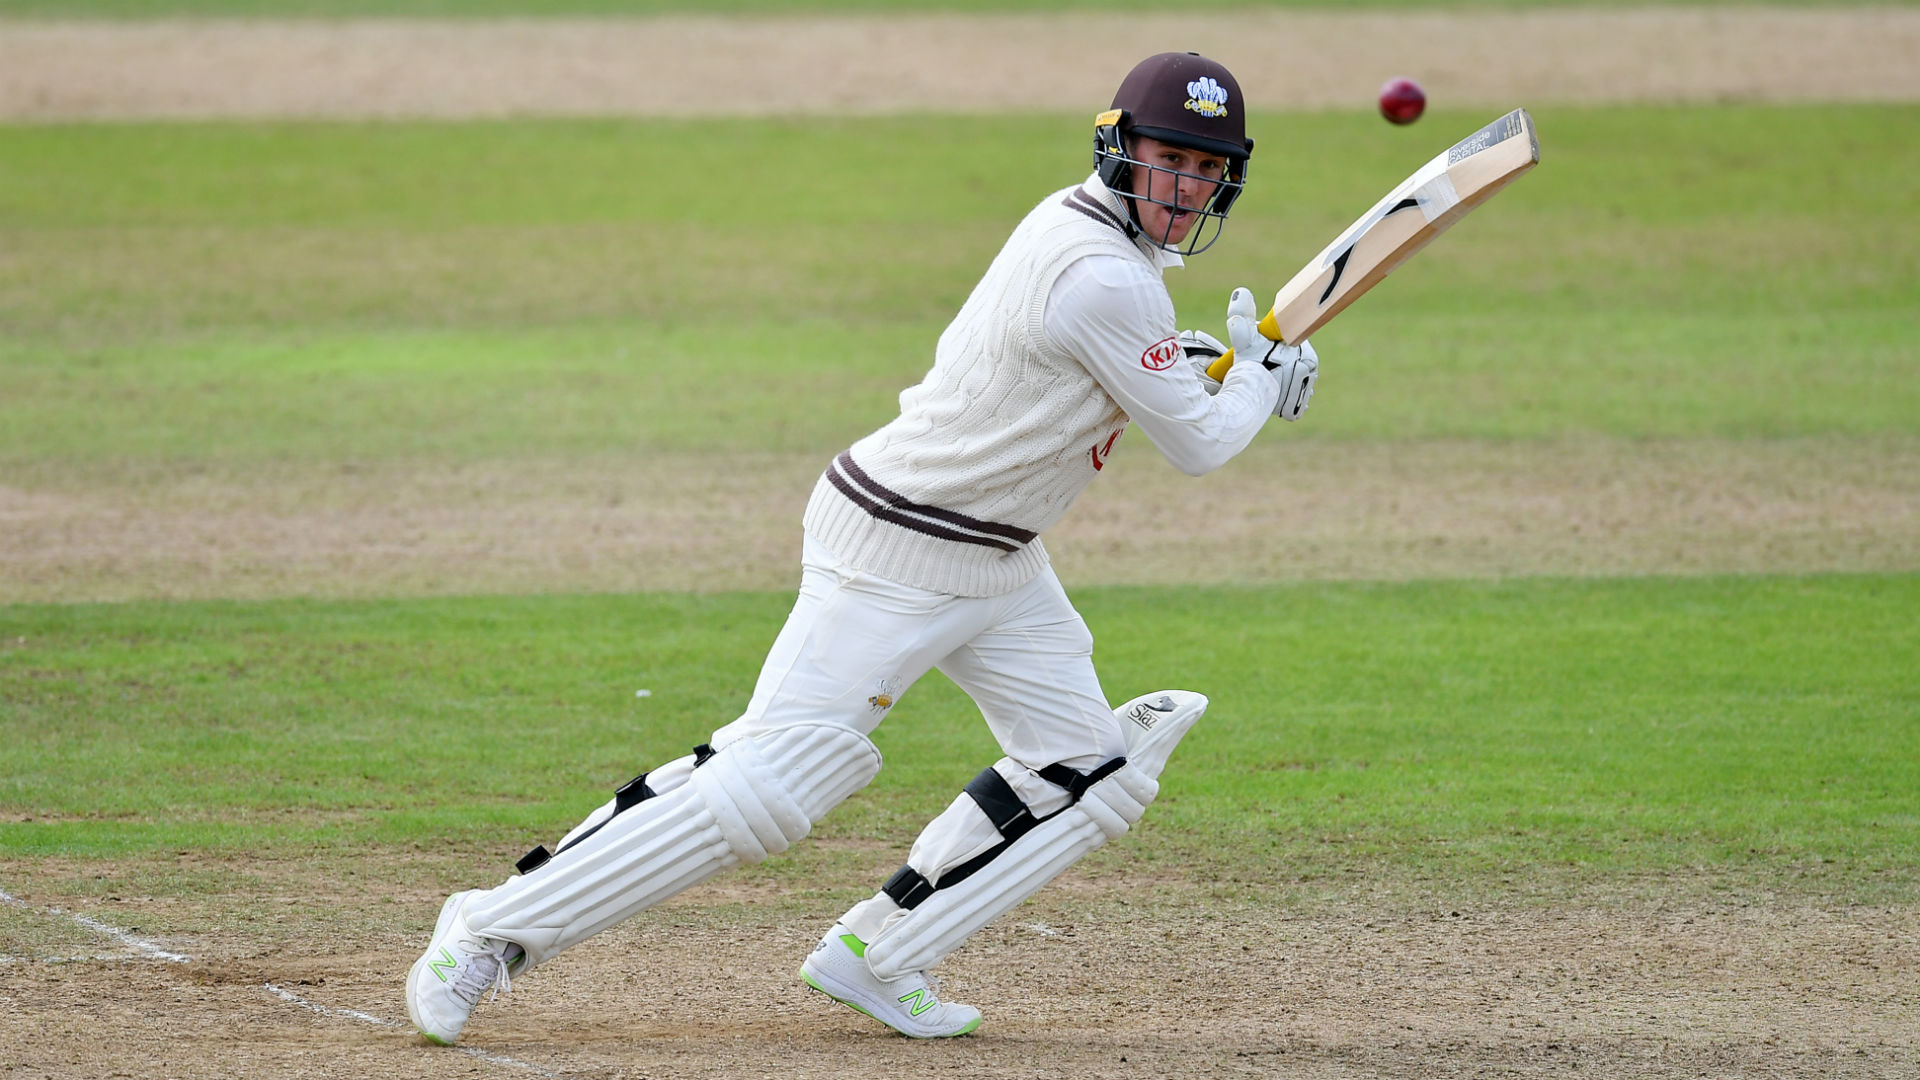 Opening batsman Jason Roy has been called into England's Test squad ahead of the Ashes and David Gower said: "I would happily endorse him."